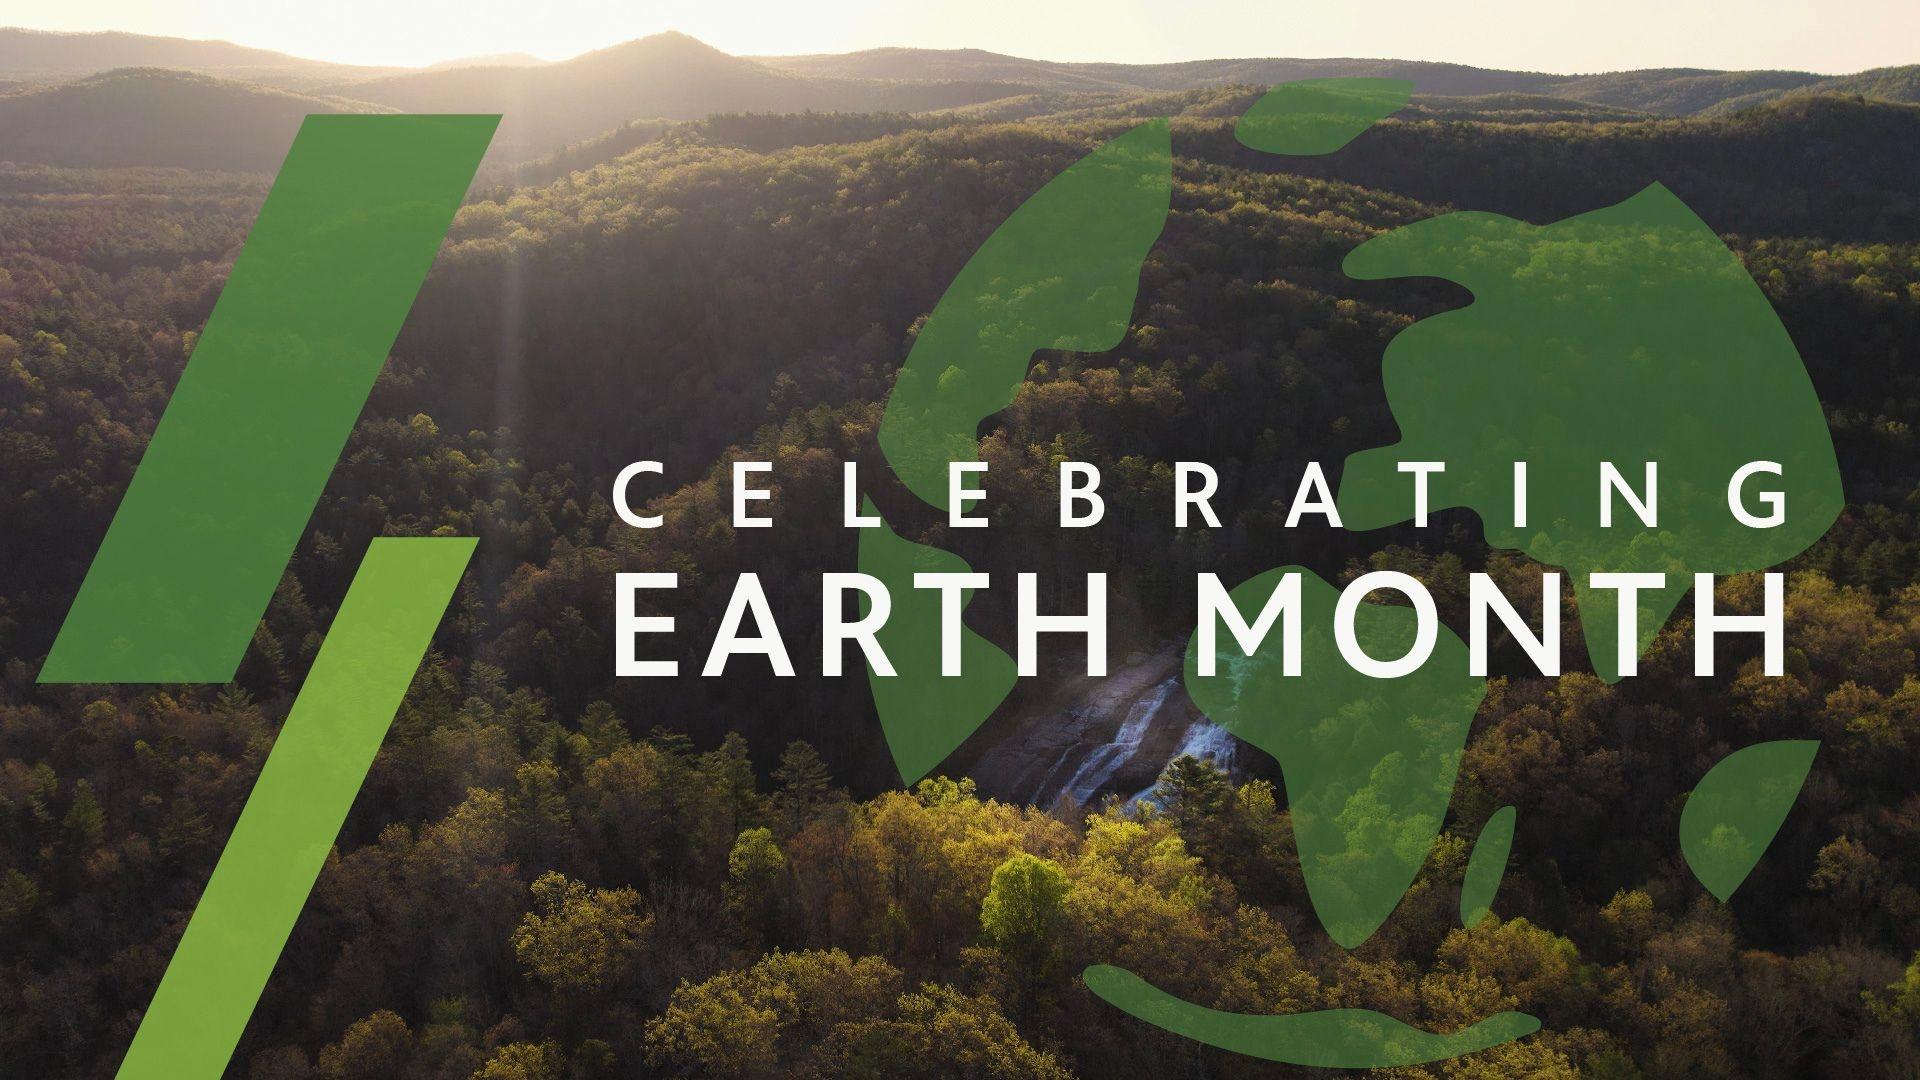 The text, " Celebrating Earth Month" over a a graphic of earth's continents and a horizon image of mountains.